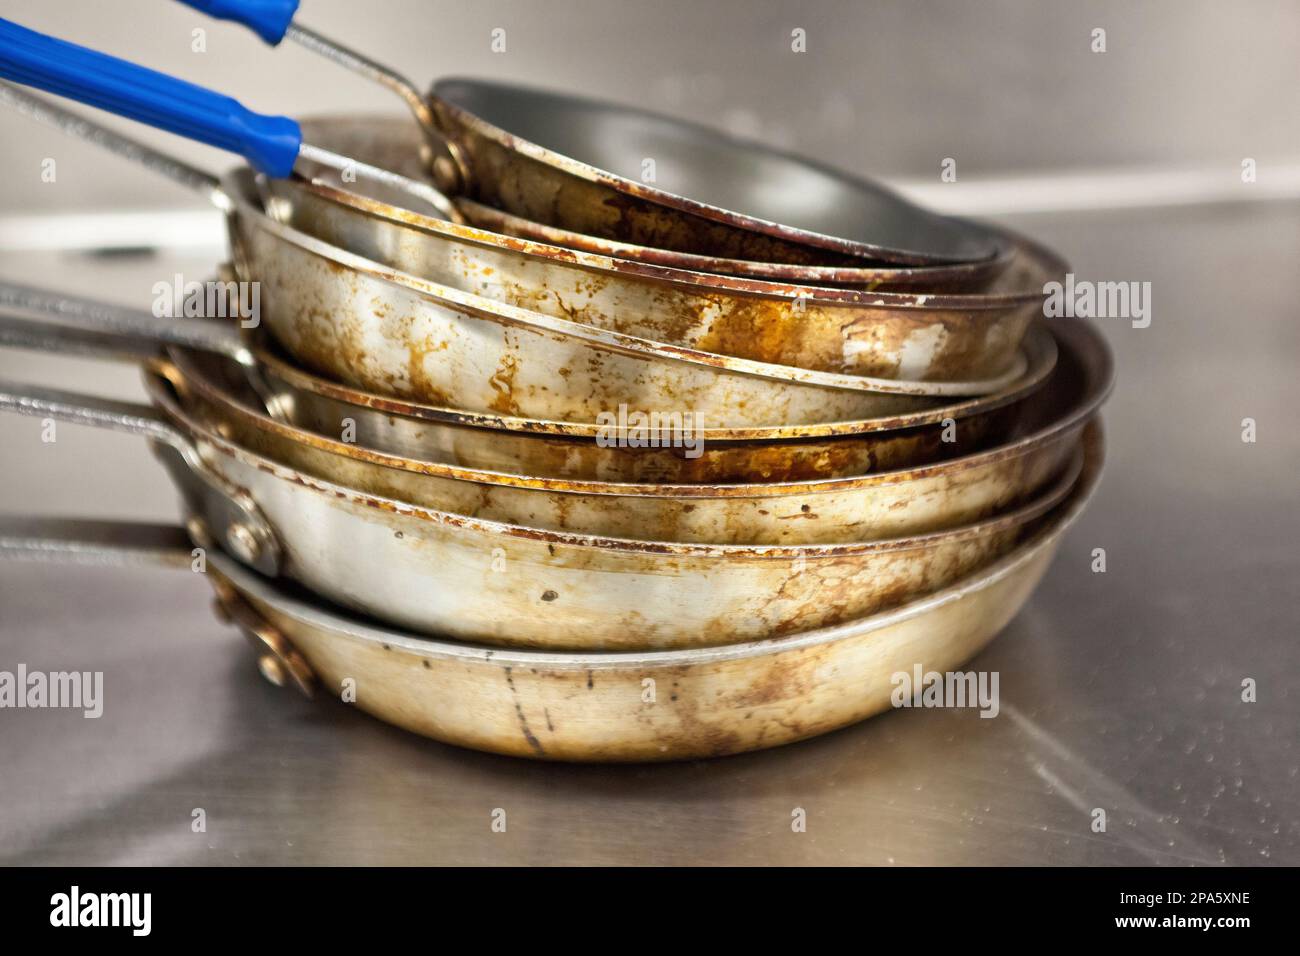 https://c8.alamy.com/comp/2PA5XNE/stack-of-dirty-worn-aluminum-pots-in-a-restaurant-kitchen-2PA5XNE.jpg